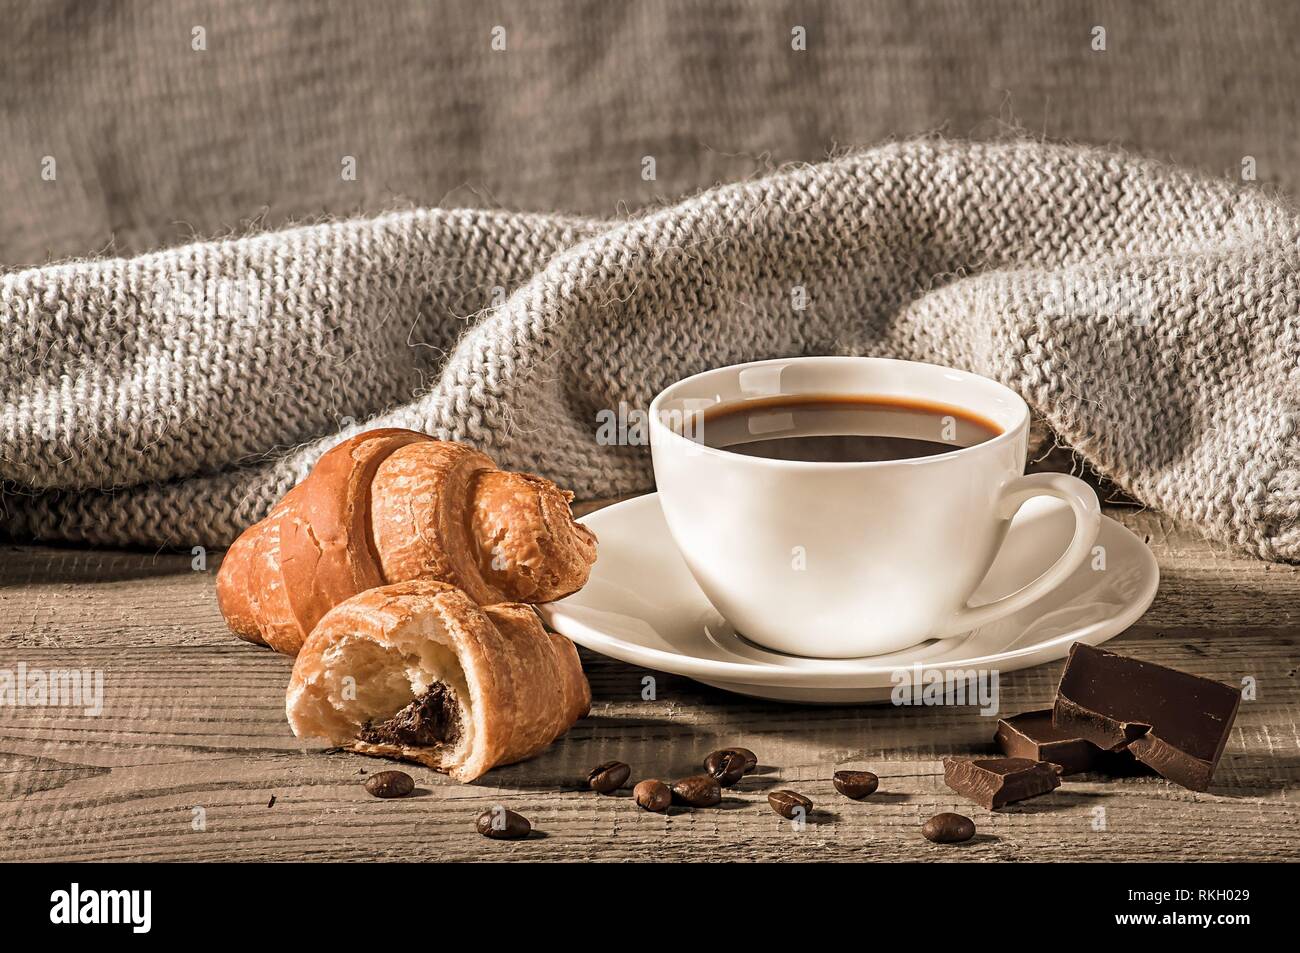 Coffee with croissants on the background of a woolen scarf. Grains of coffee next to the cup. Several pieces of dark chocolate next to each other. Stock Photo